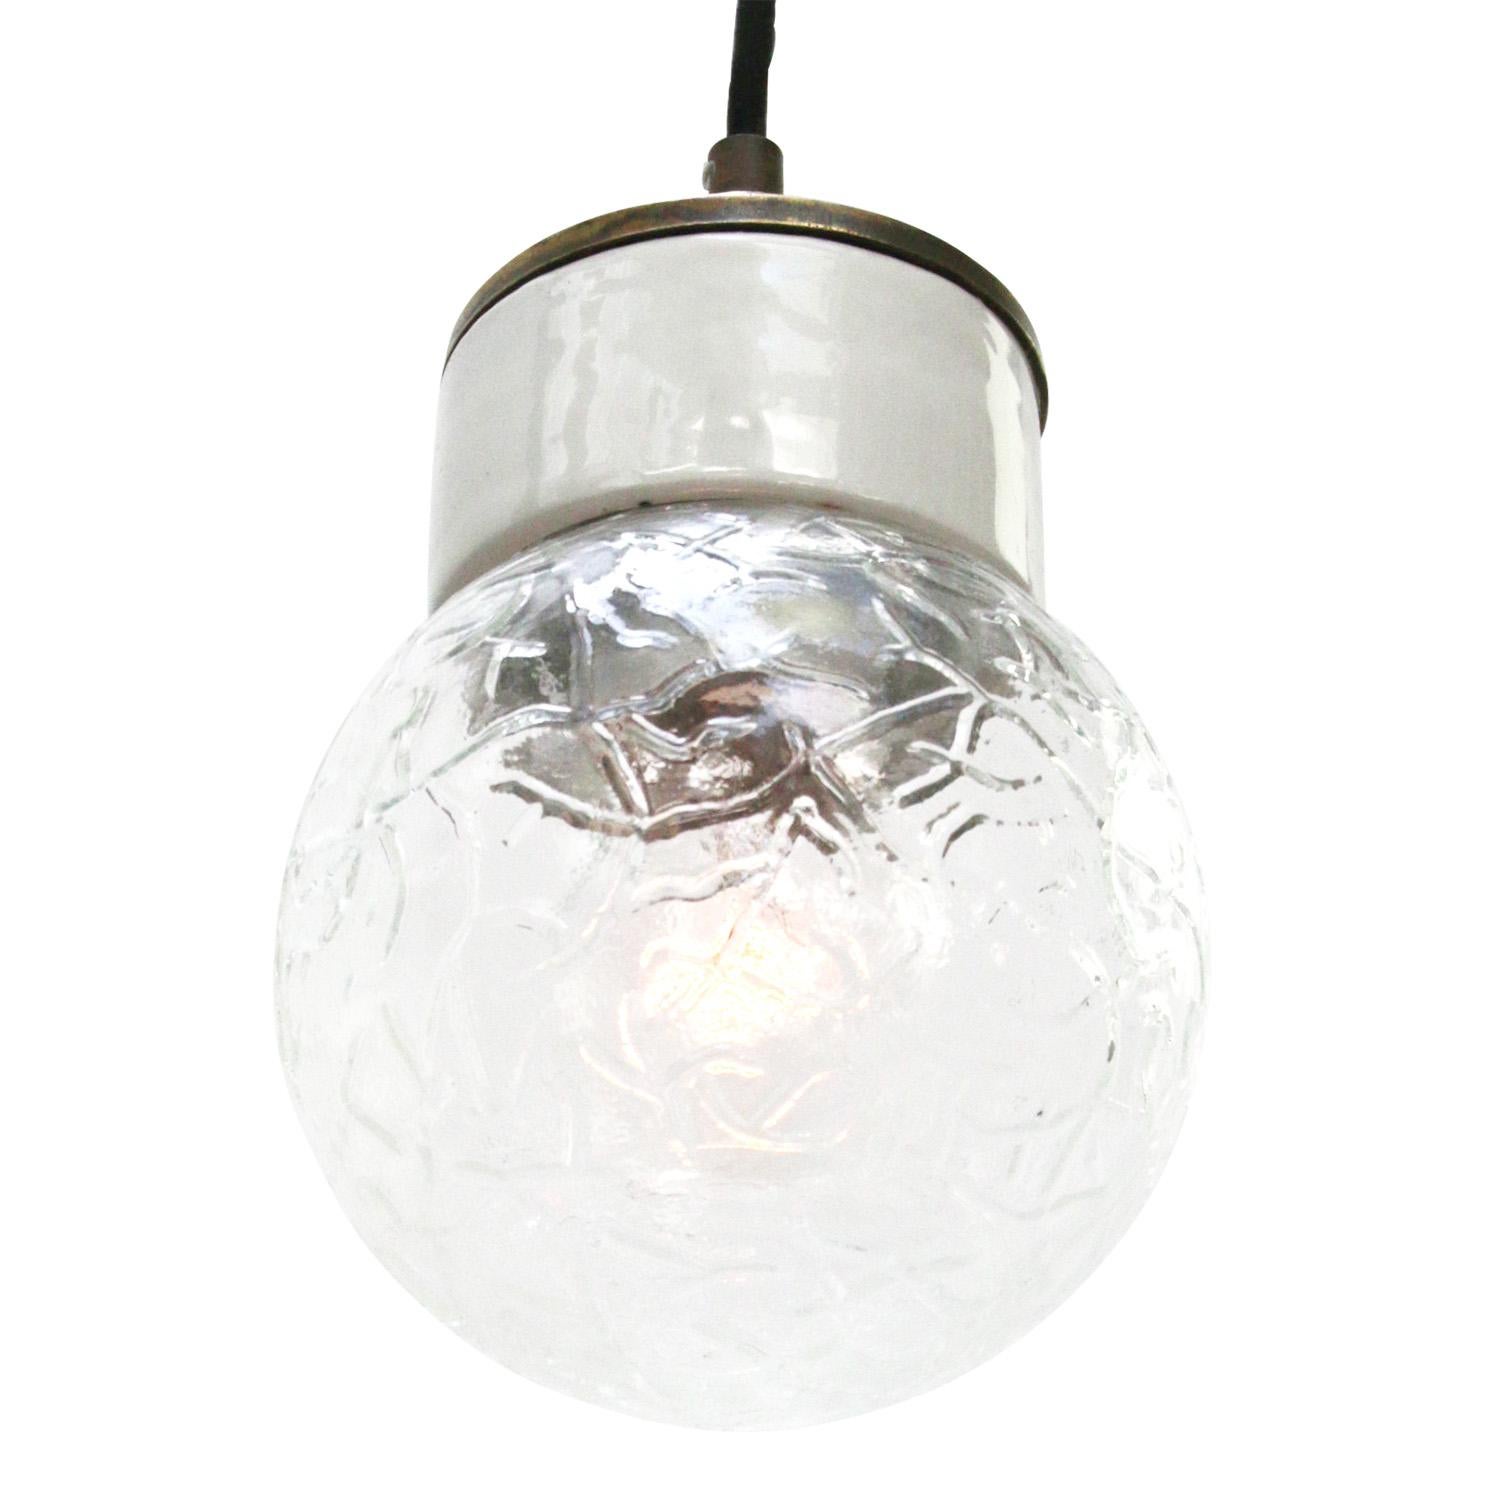 Porcelain industrial hanging lamp.
White porcelain, brass and clear texture glass.
2 conductors, no ground.

Weight: 1.20 kg / 2.6 lb

Priced per individual item. All lamps have been made suitable by international standards for incandescent